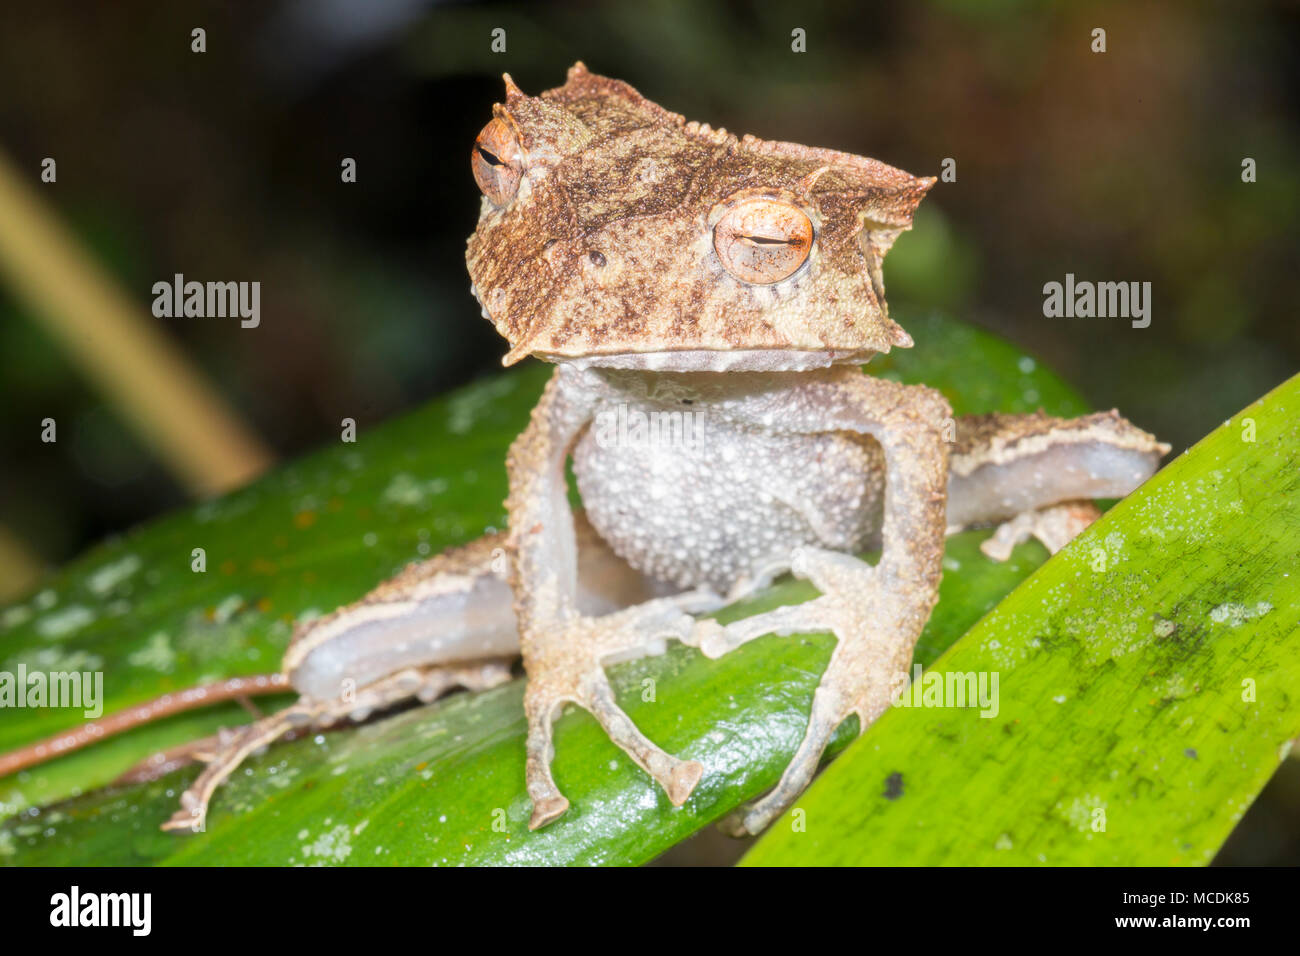 The extremely rare and endangered Ecuador Horned Treefrog (Hemiphractus bubalus). Roosting at night In its natural habitat the rainforest understory,  Stock Photo